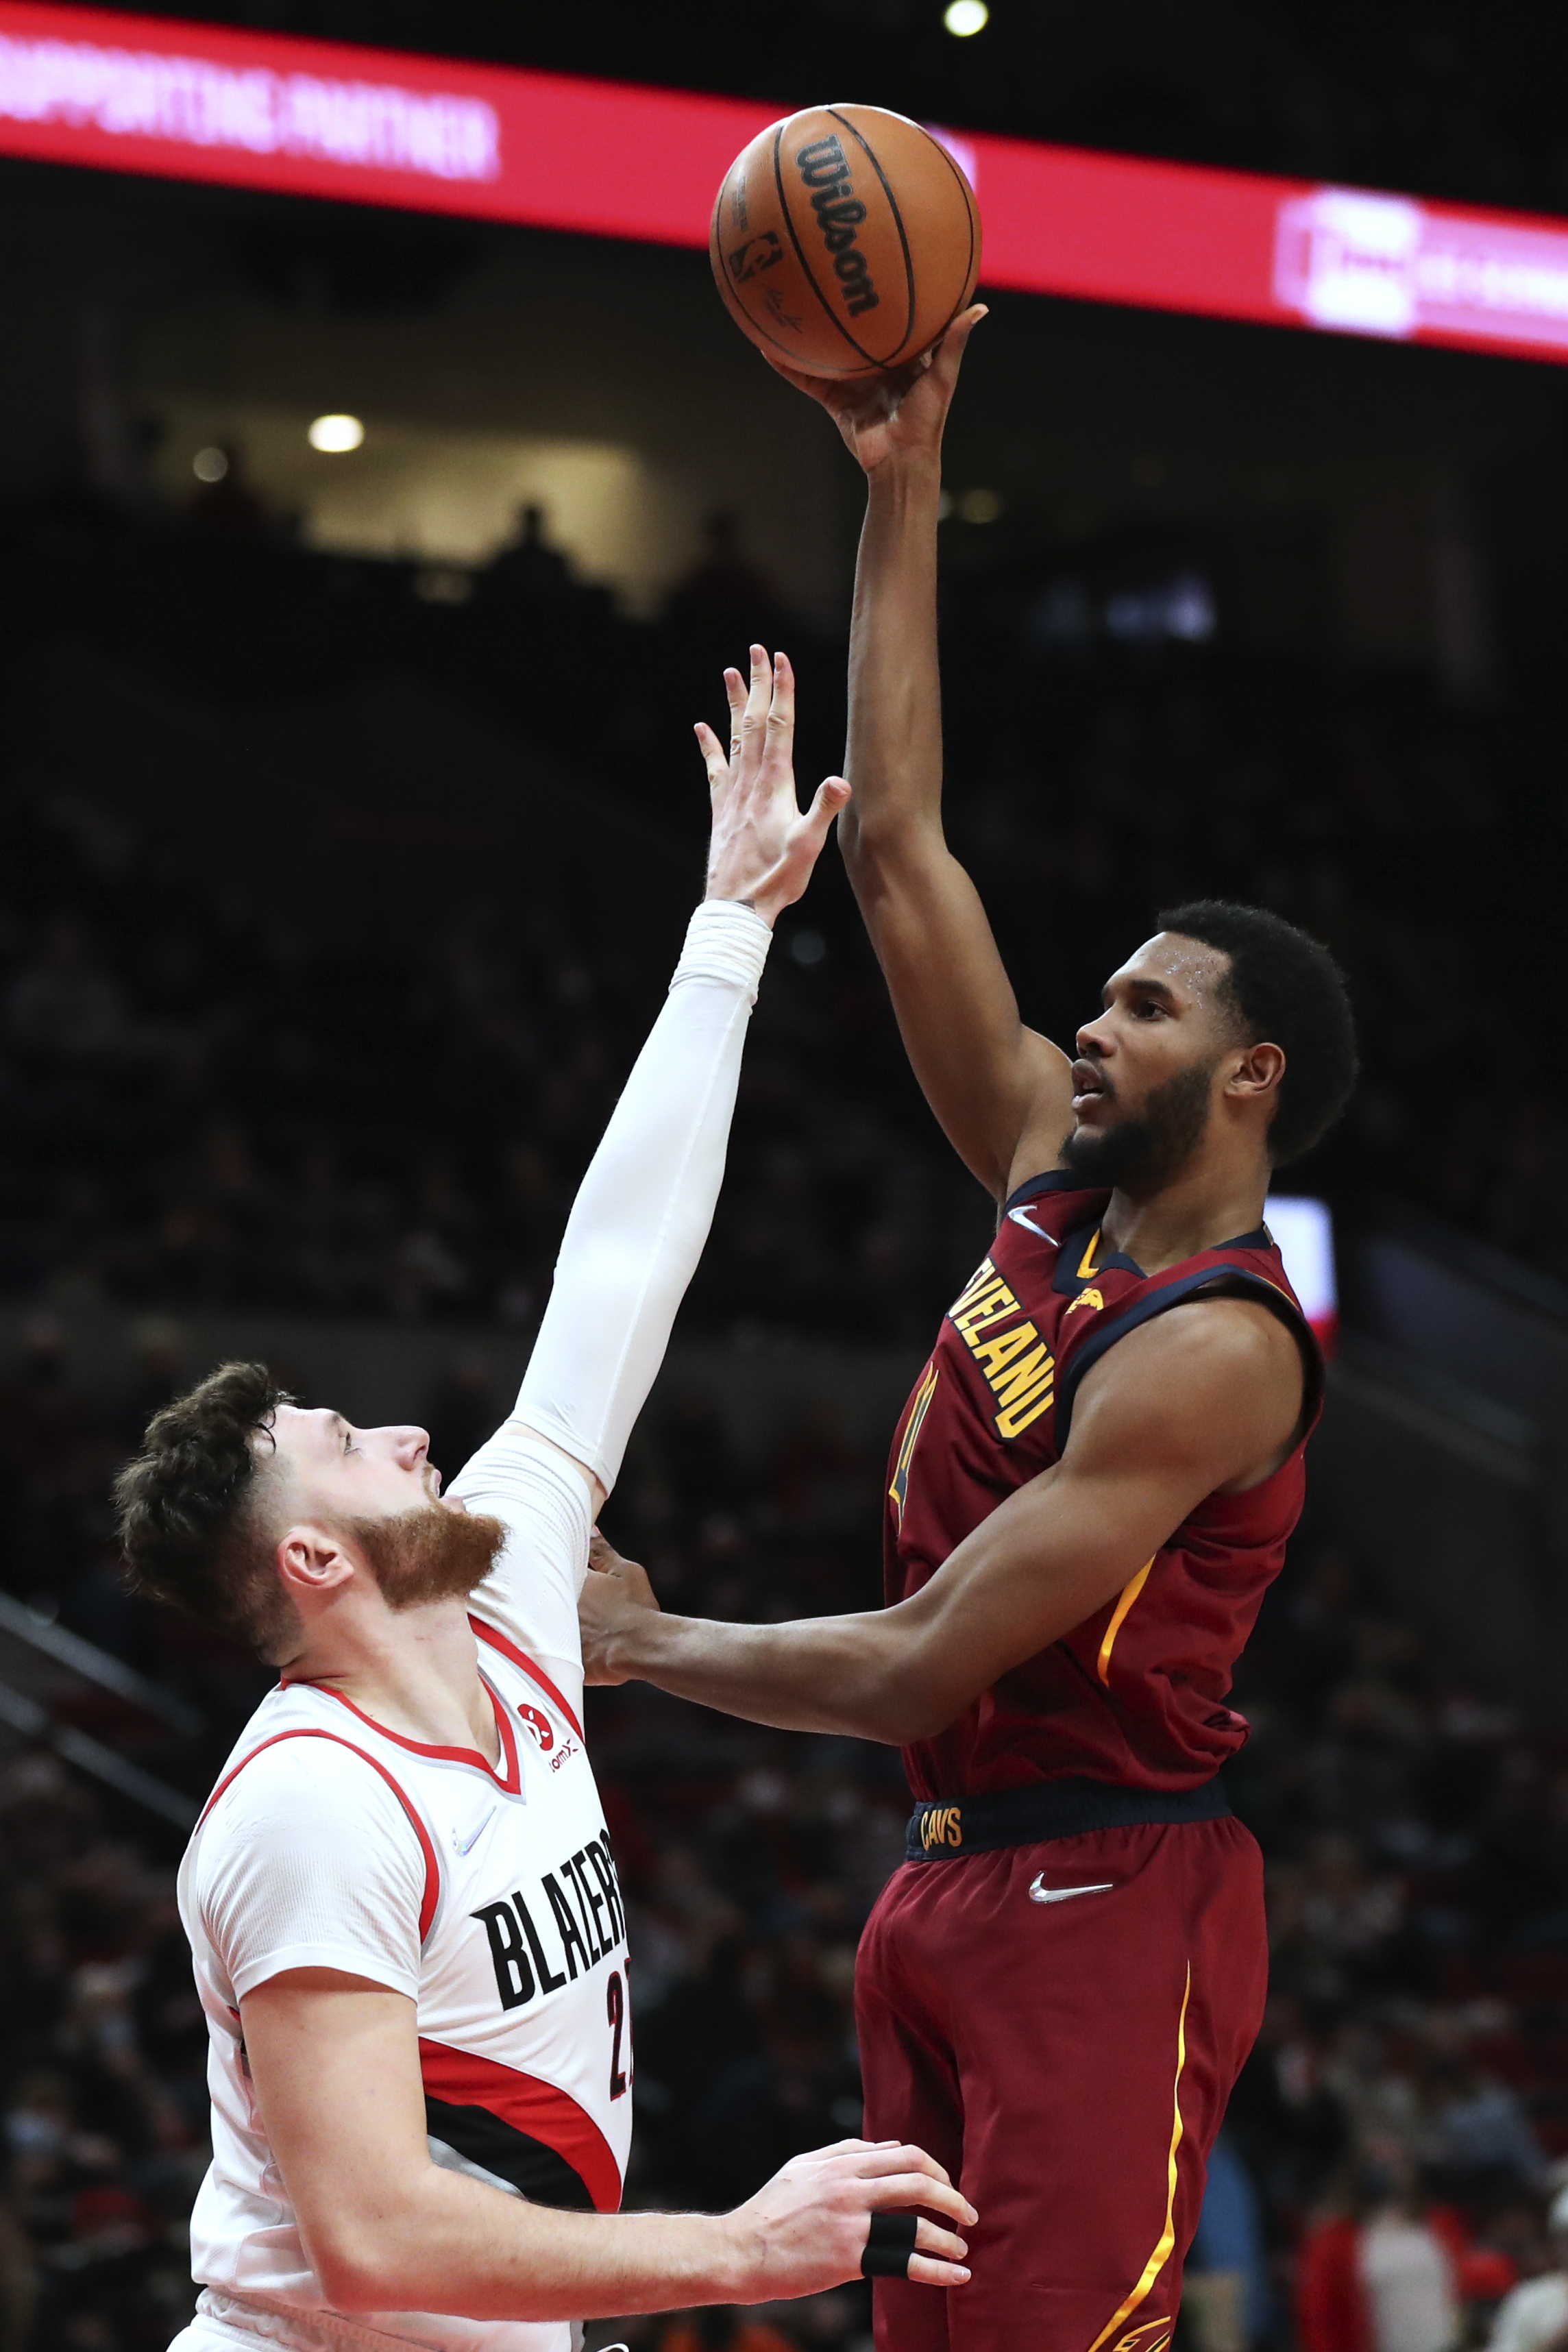 Garland's 26 points leads Cavs in 114-101 win at Portland - The